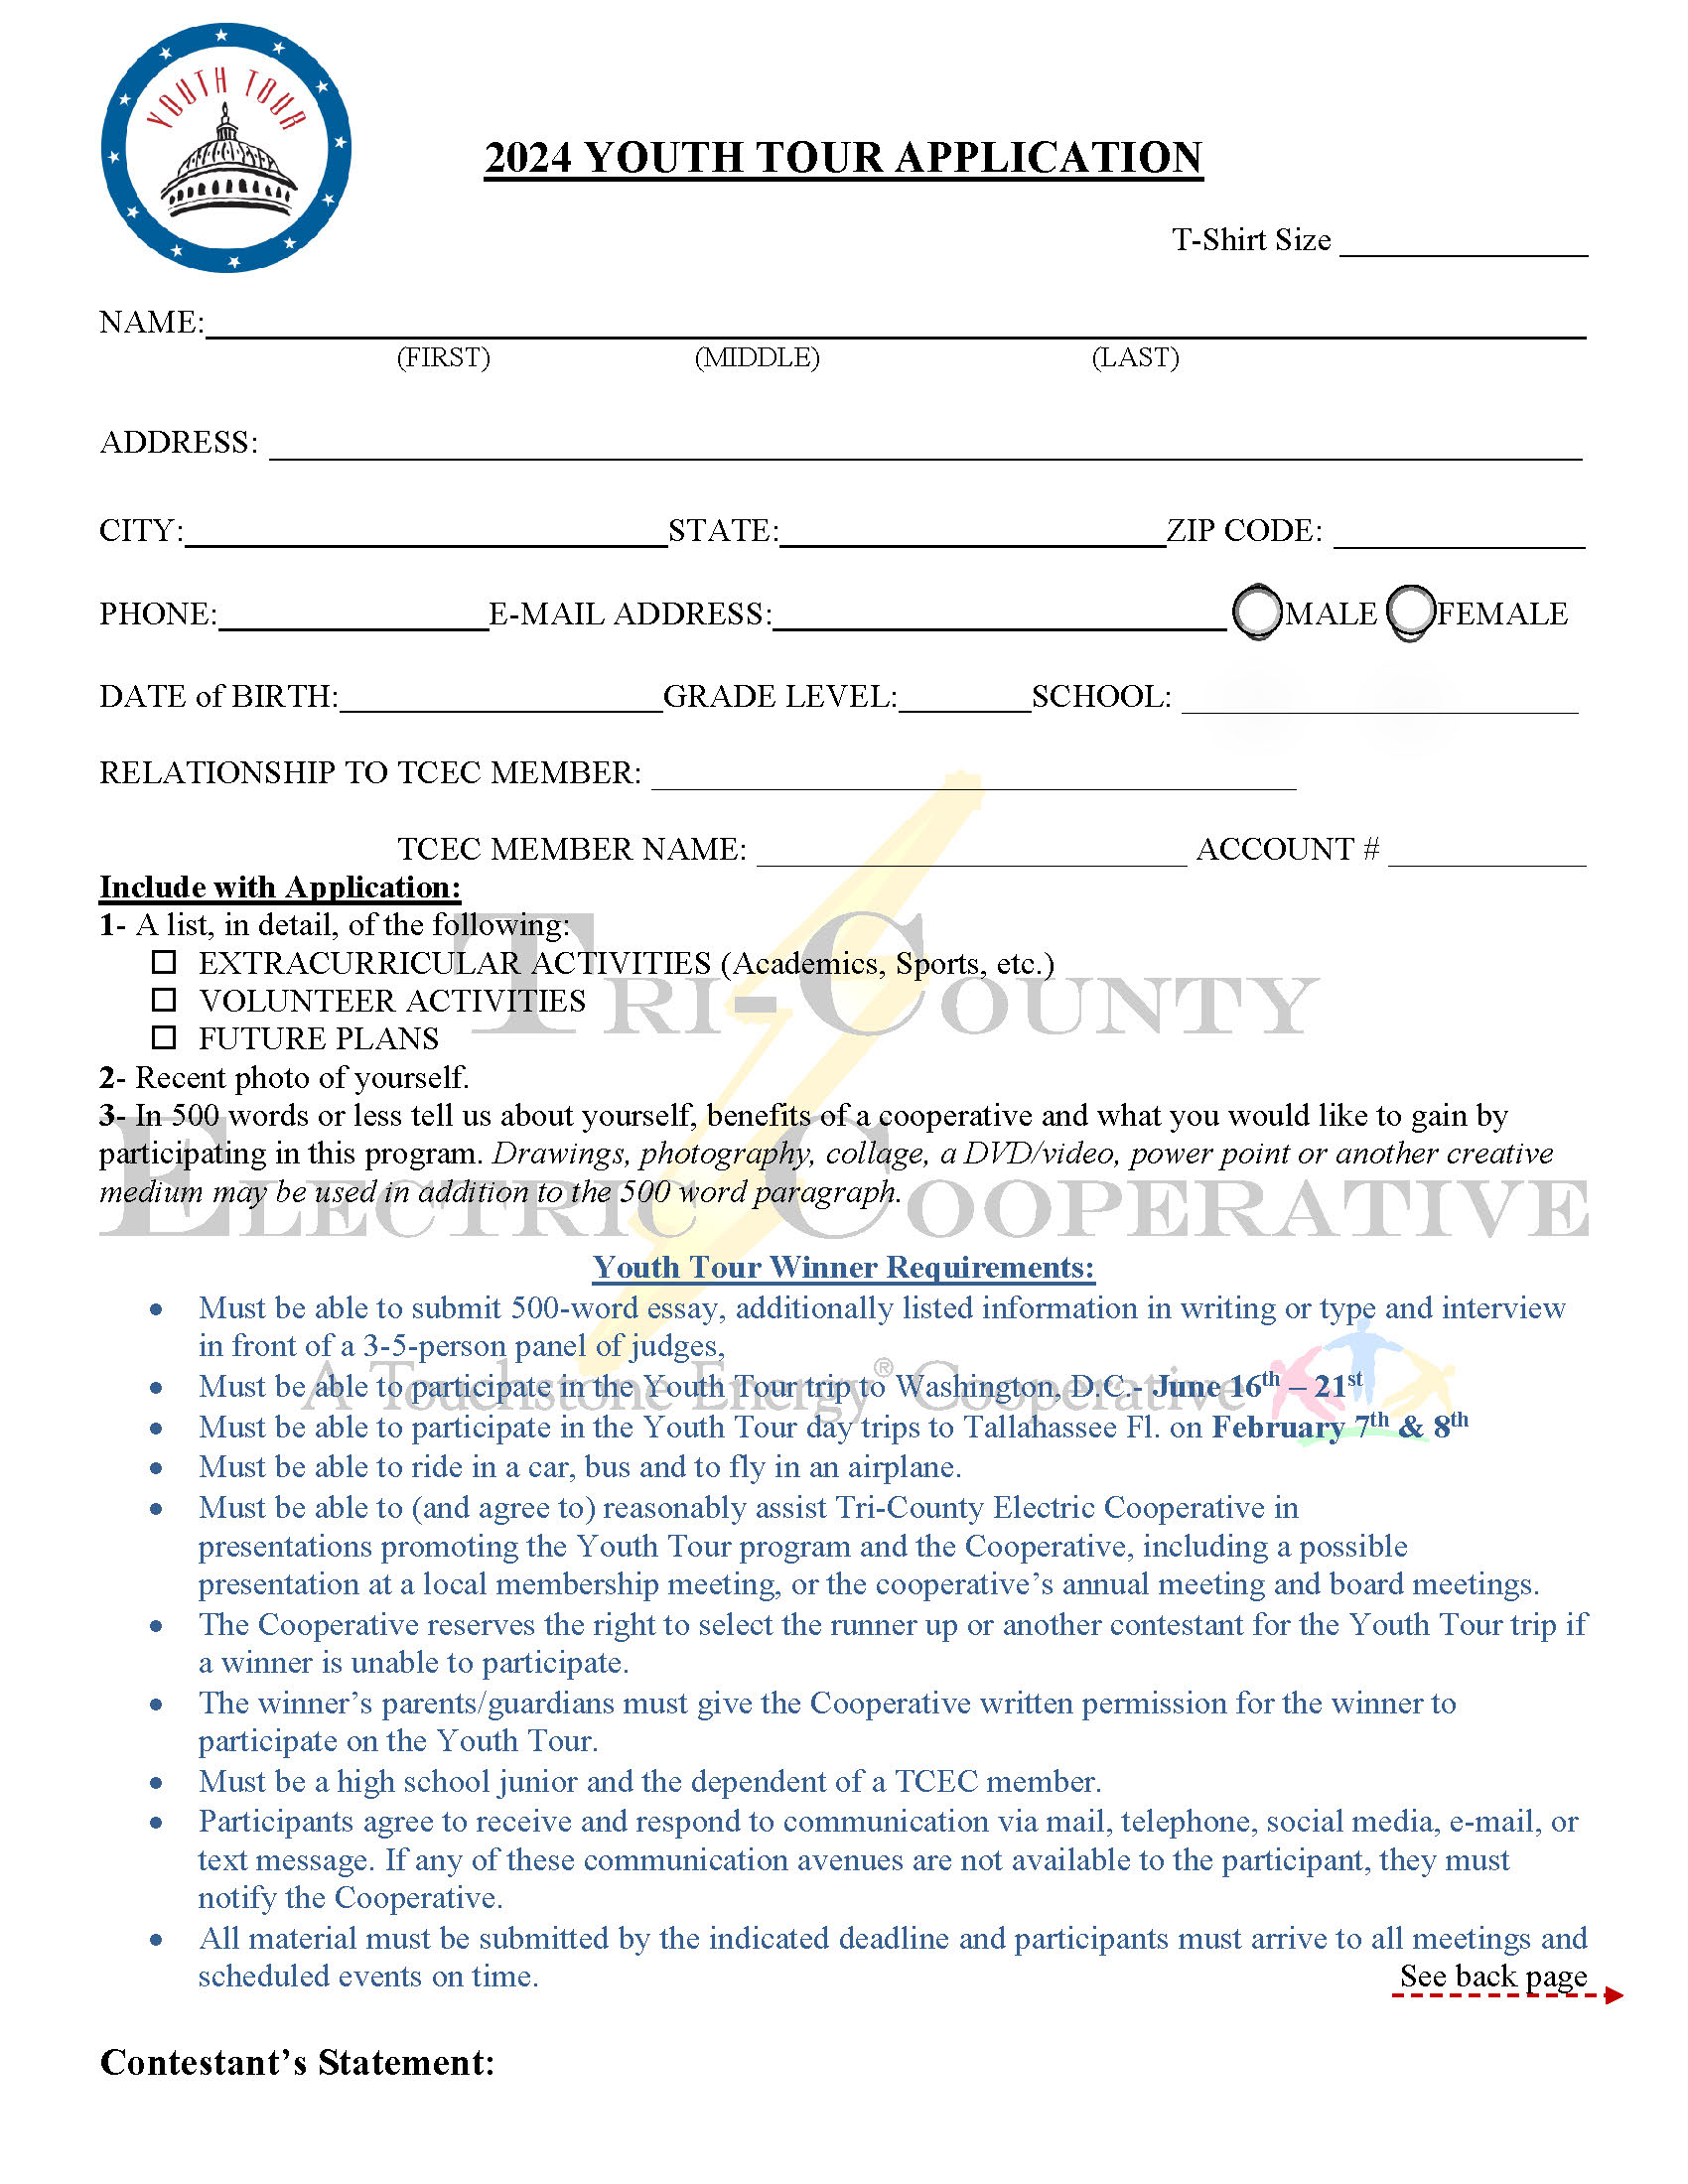 Youth Tour Application - Click here to download